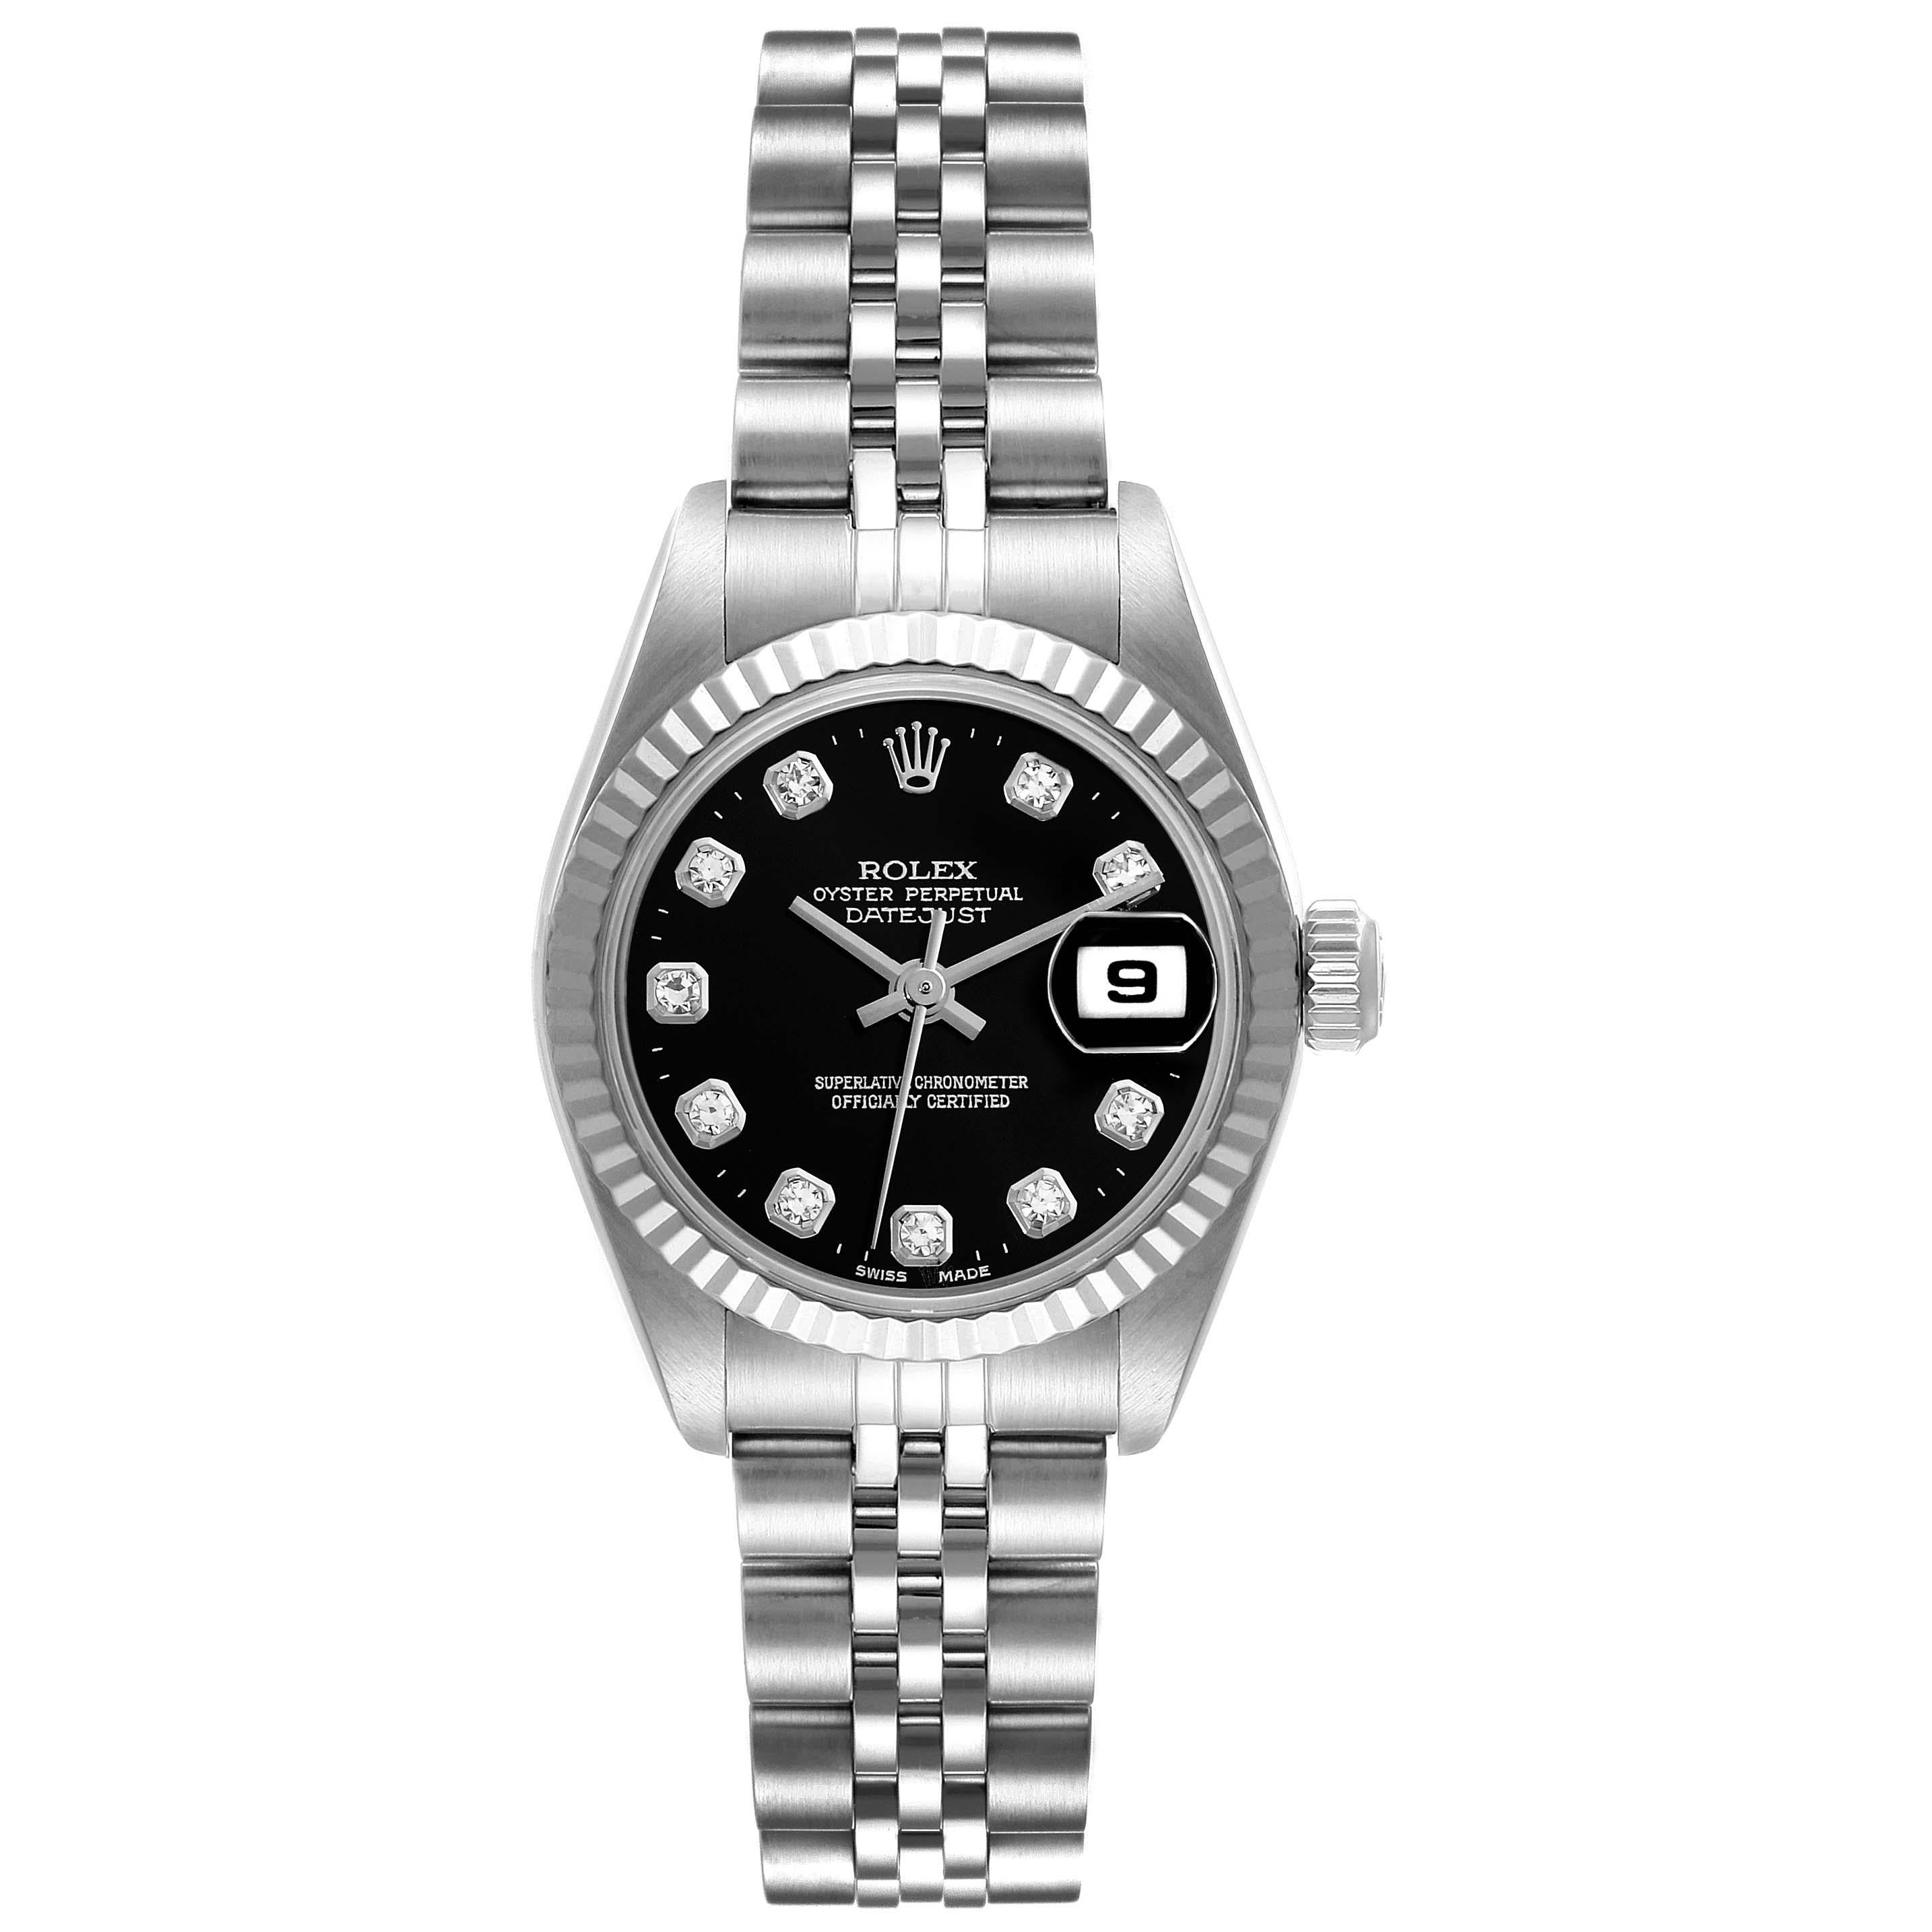 Rolex Datejust Steel White Gold Black Diamond Dial Ladies Watch 79174. Officially certified chronometer automatic self-winding movement. Stainless steel oyster case 26.0 mm in diameter. Rolex logo on a crown. 18k white gold fluted bezel. Scratch